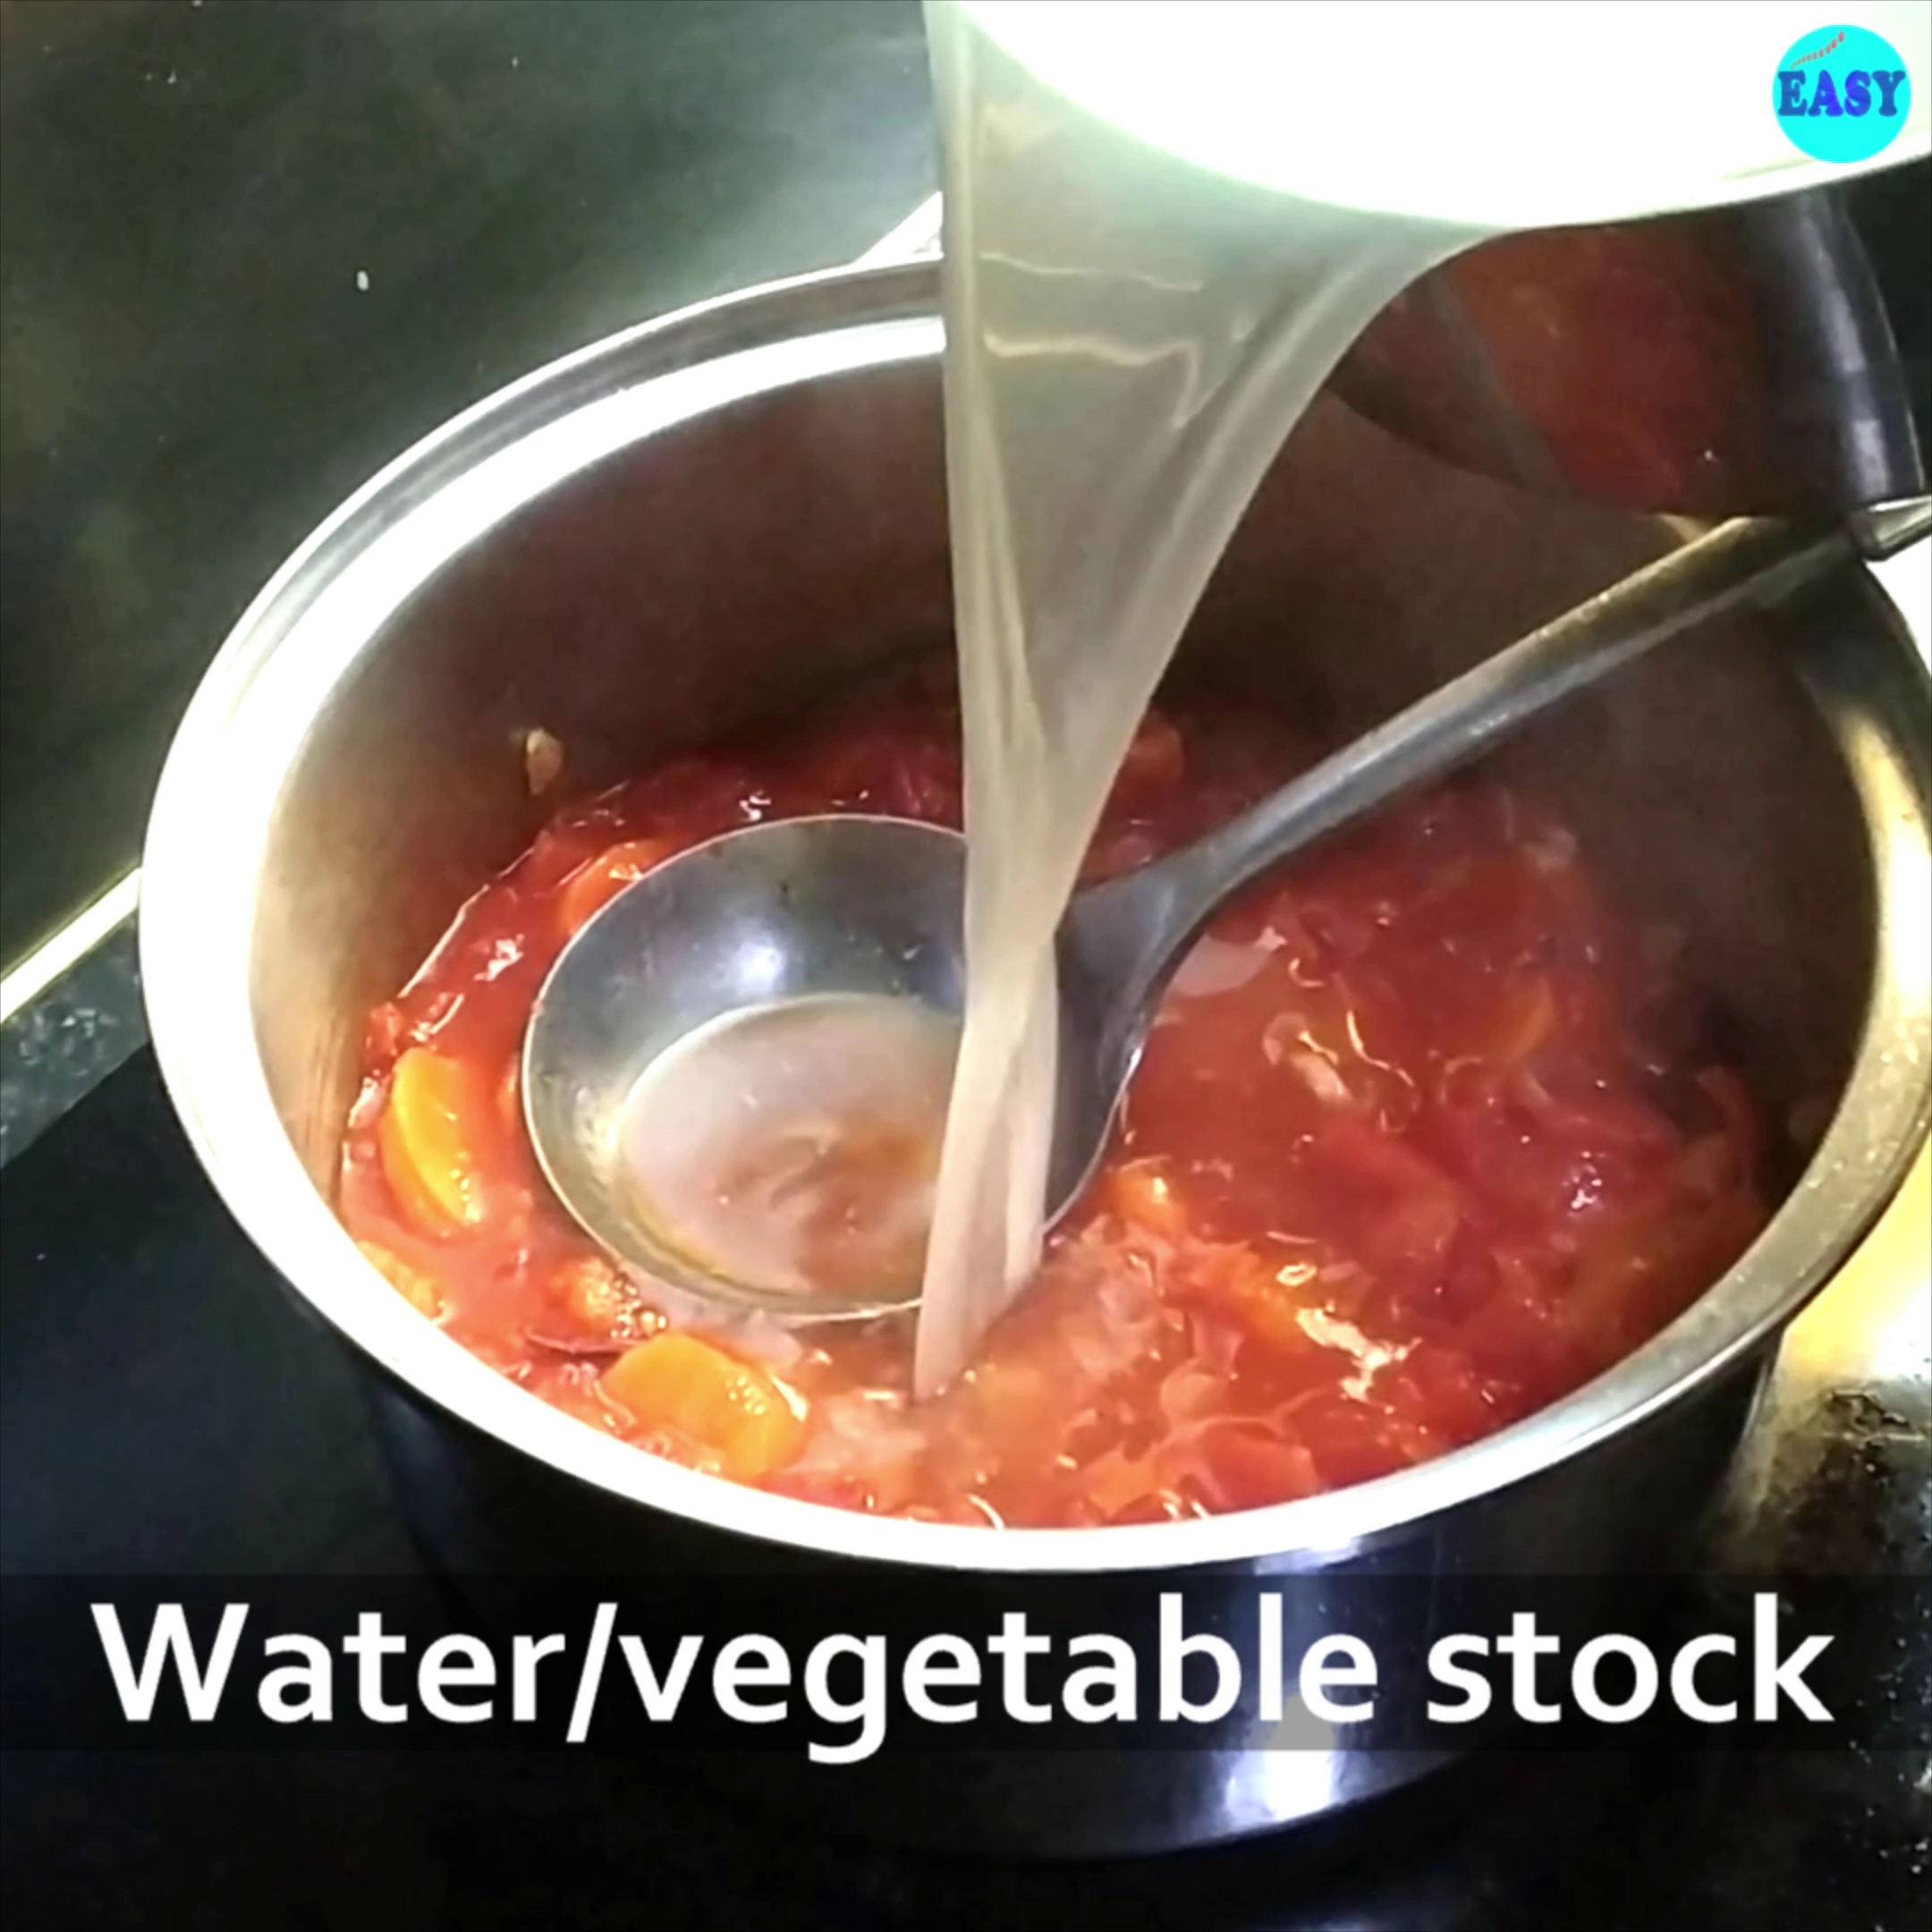 Step 4 - Add vegetable stock or water whatever you are using and cook it for 15-20 mins on medium heat until the tomatoes are tender. Alternatively, you can pressure cook it for up to two whistles.